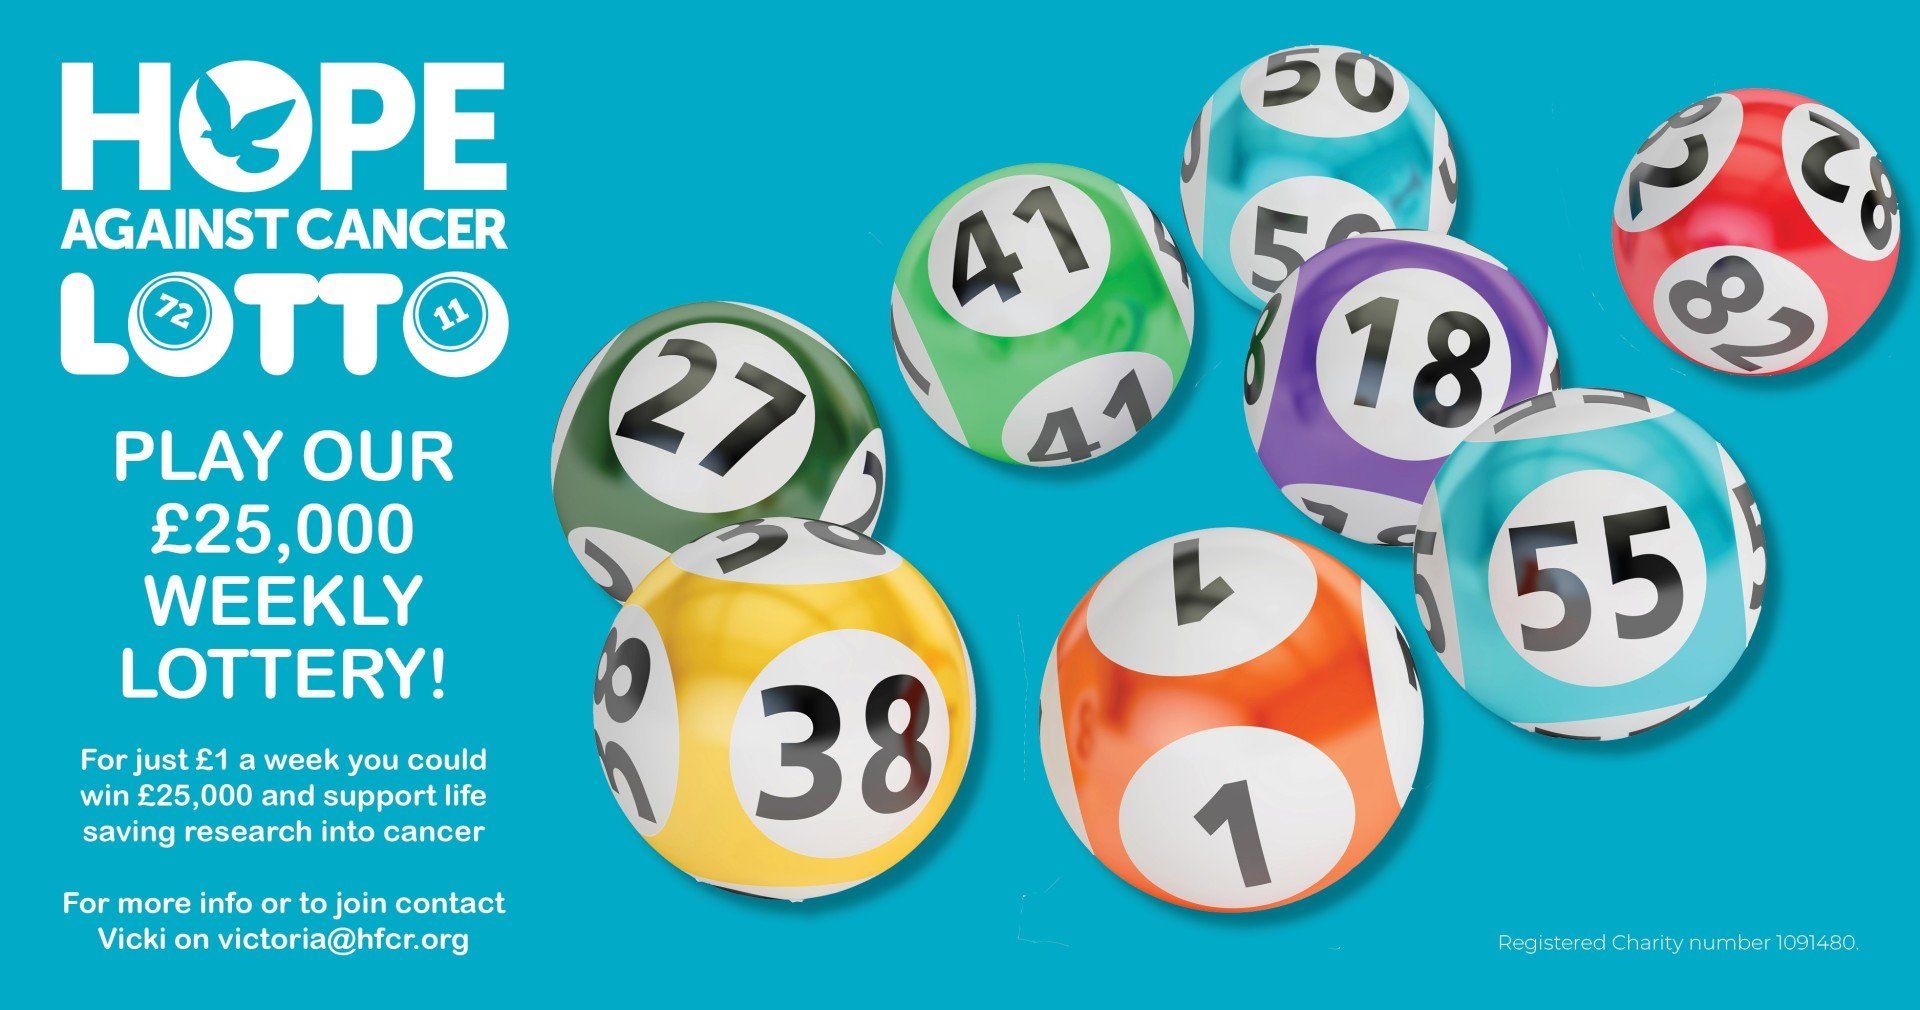 Hope Against Cancer Lotto